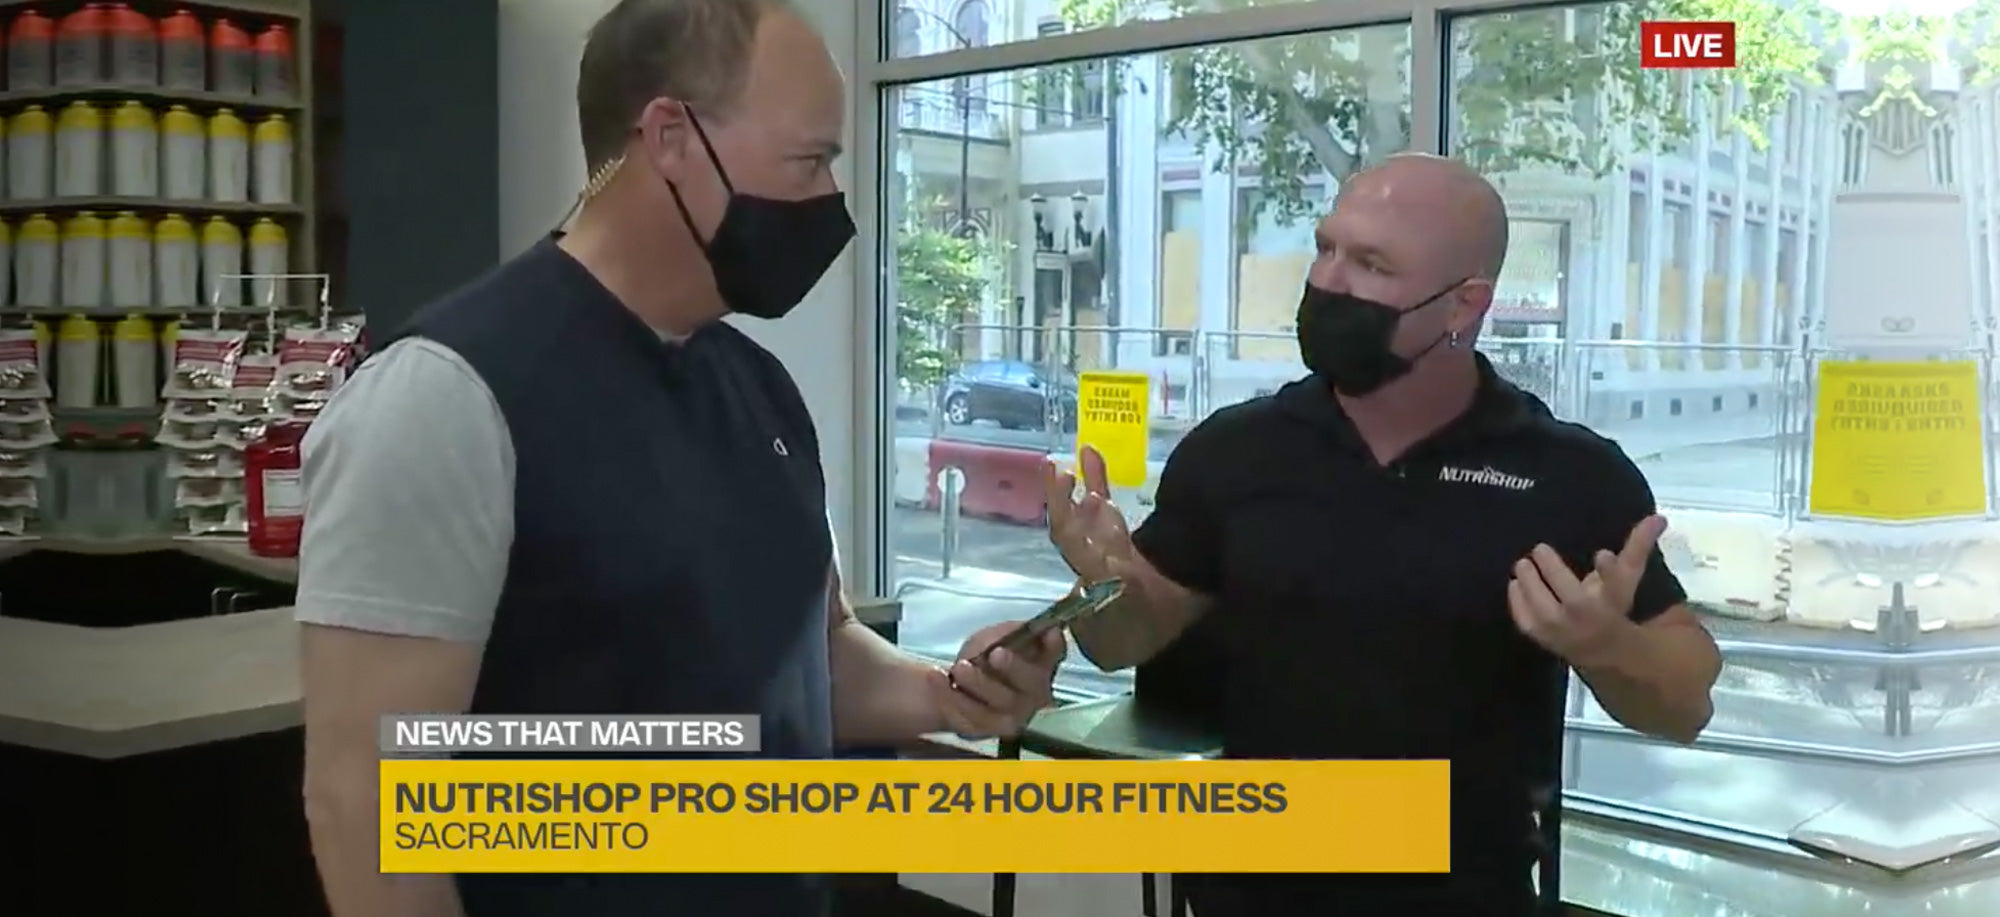 First NUTRISHOP® Pro Shop To Open Inside a 24 Hour Fitness® Club Featured in Live News Segment 